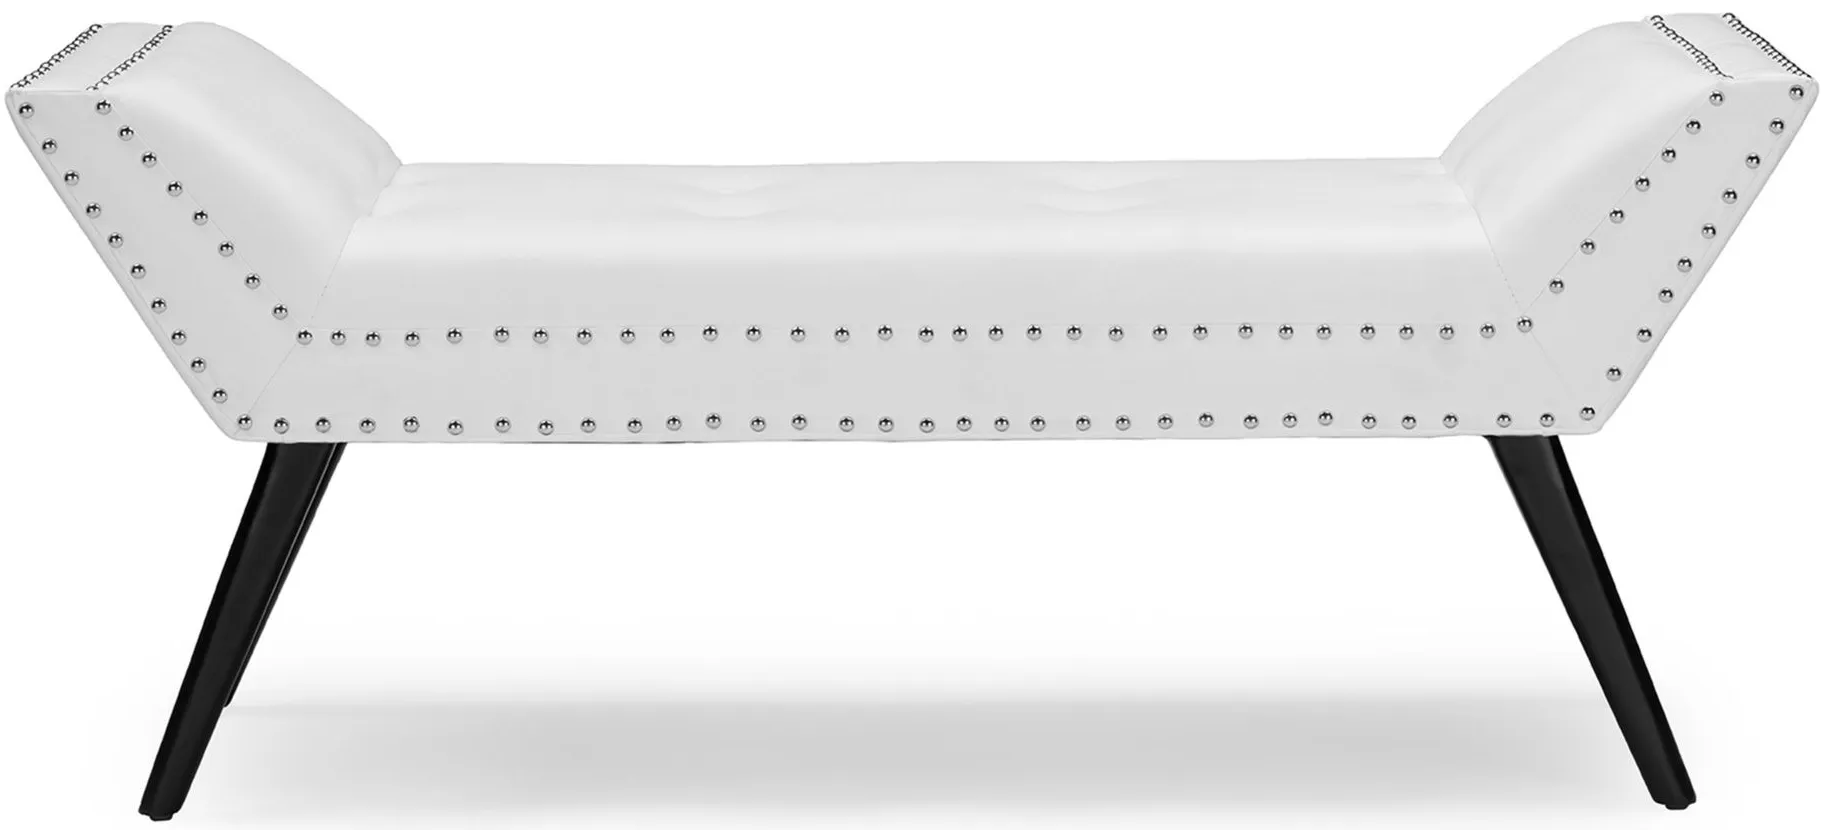 Tamblin Ottoman Seating Bench in White by Wholesale Interiors